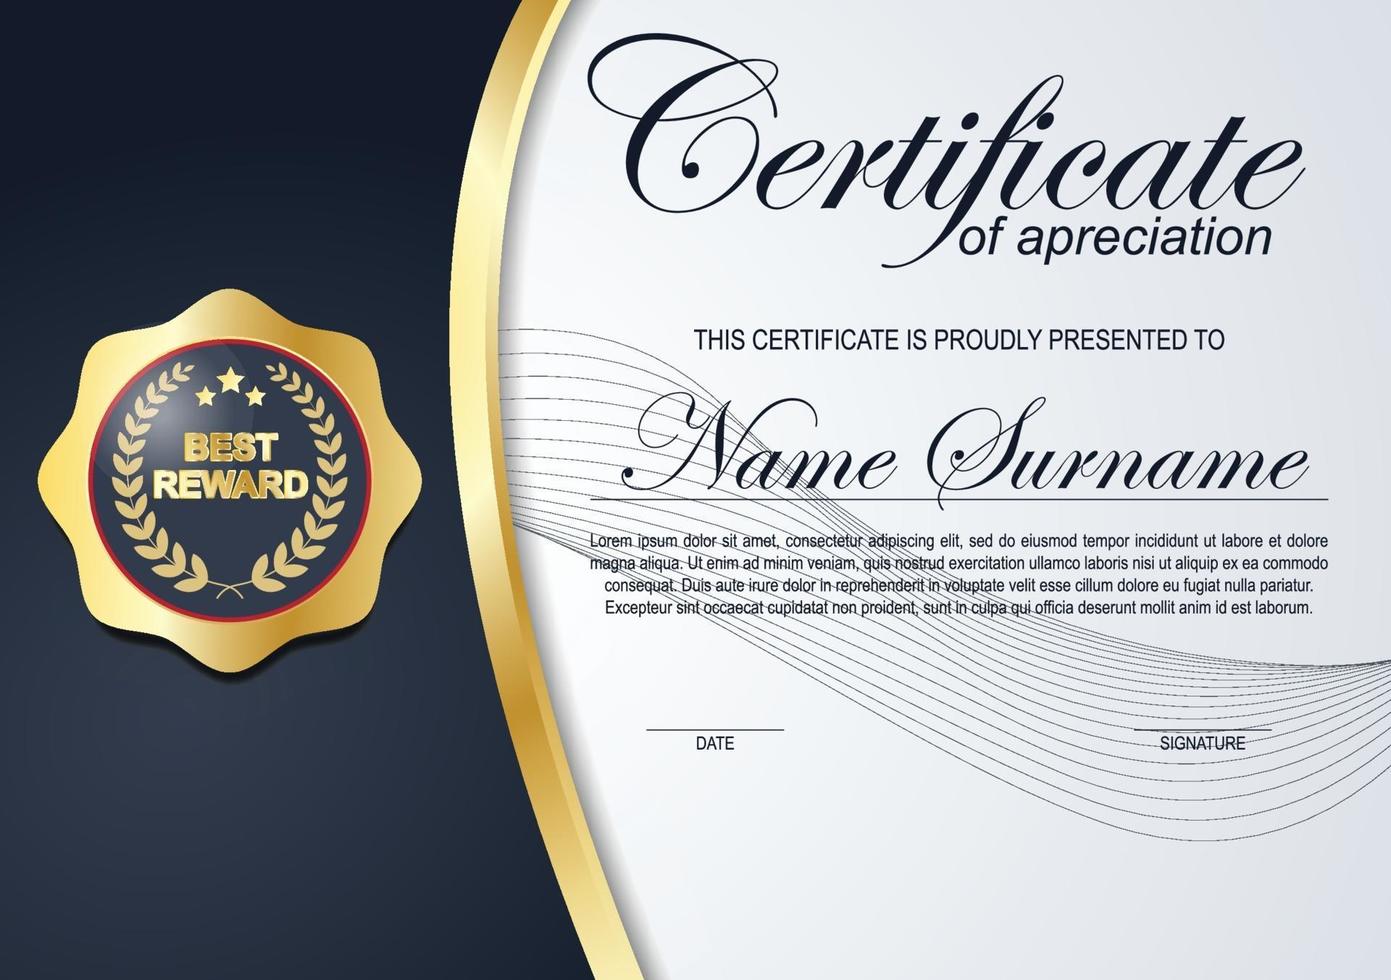 Modern certificate design template with gold colour and modern pattern vector